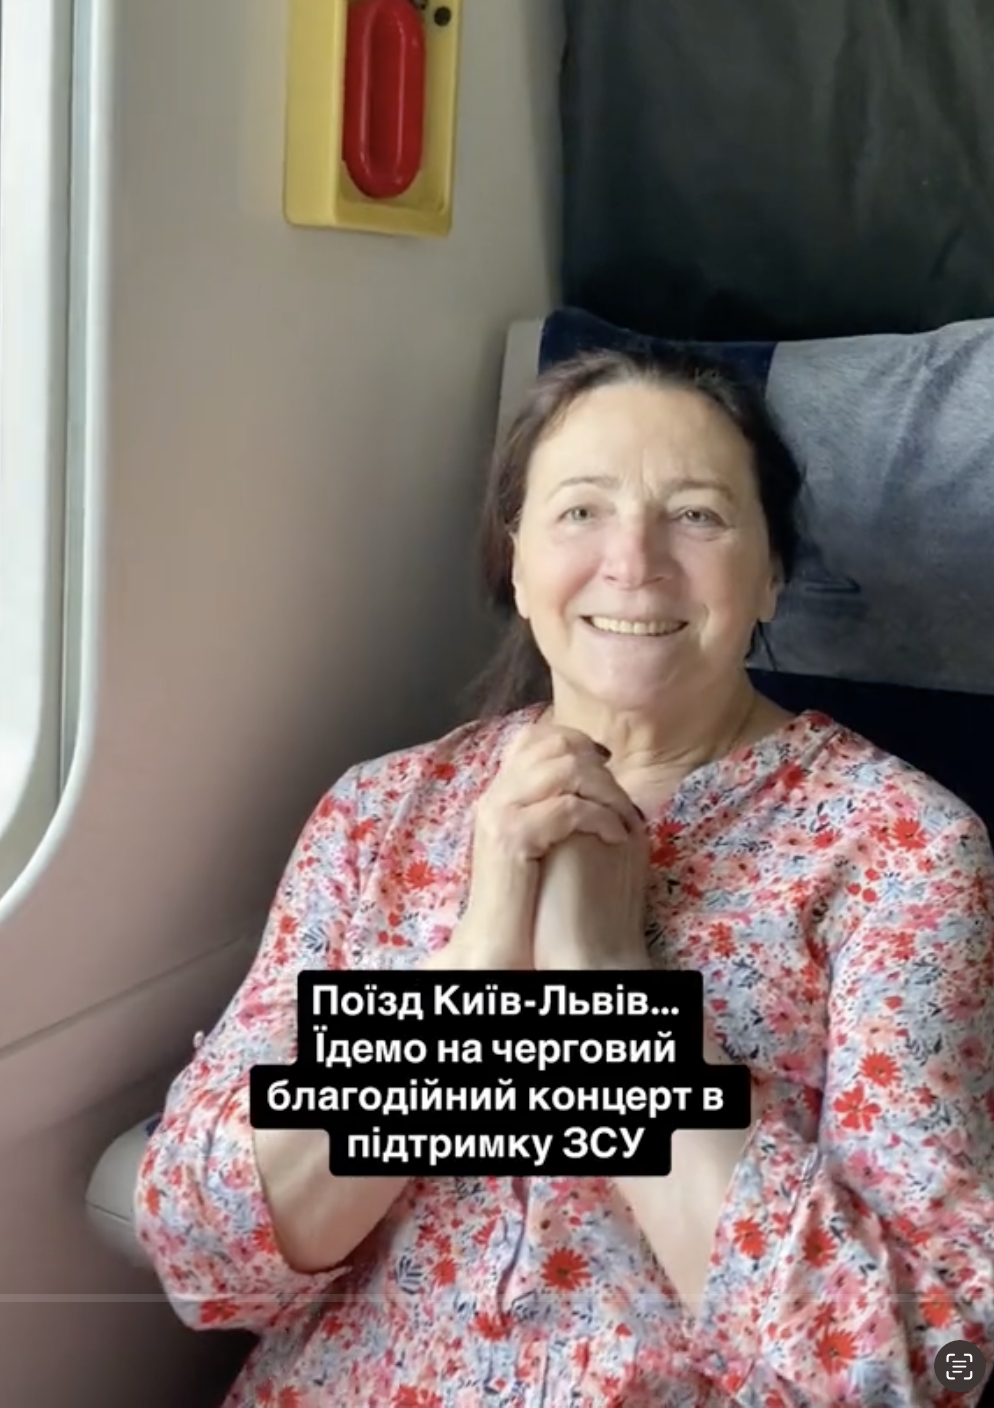 ''I'm a little tired, I'm going to lie down'': Nina Matvienko's friend on the last conversation with the legendary singer